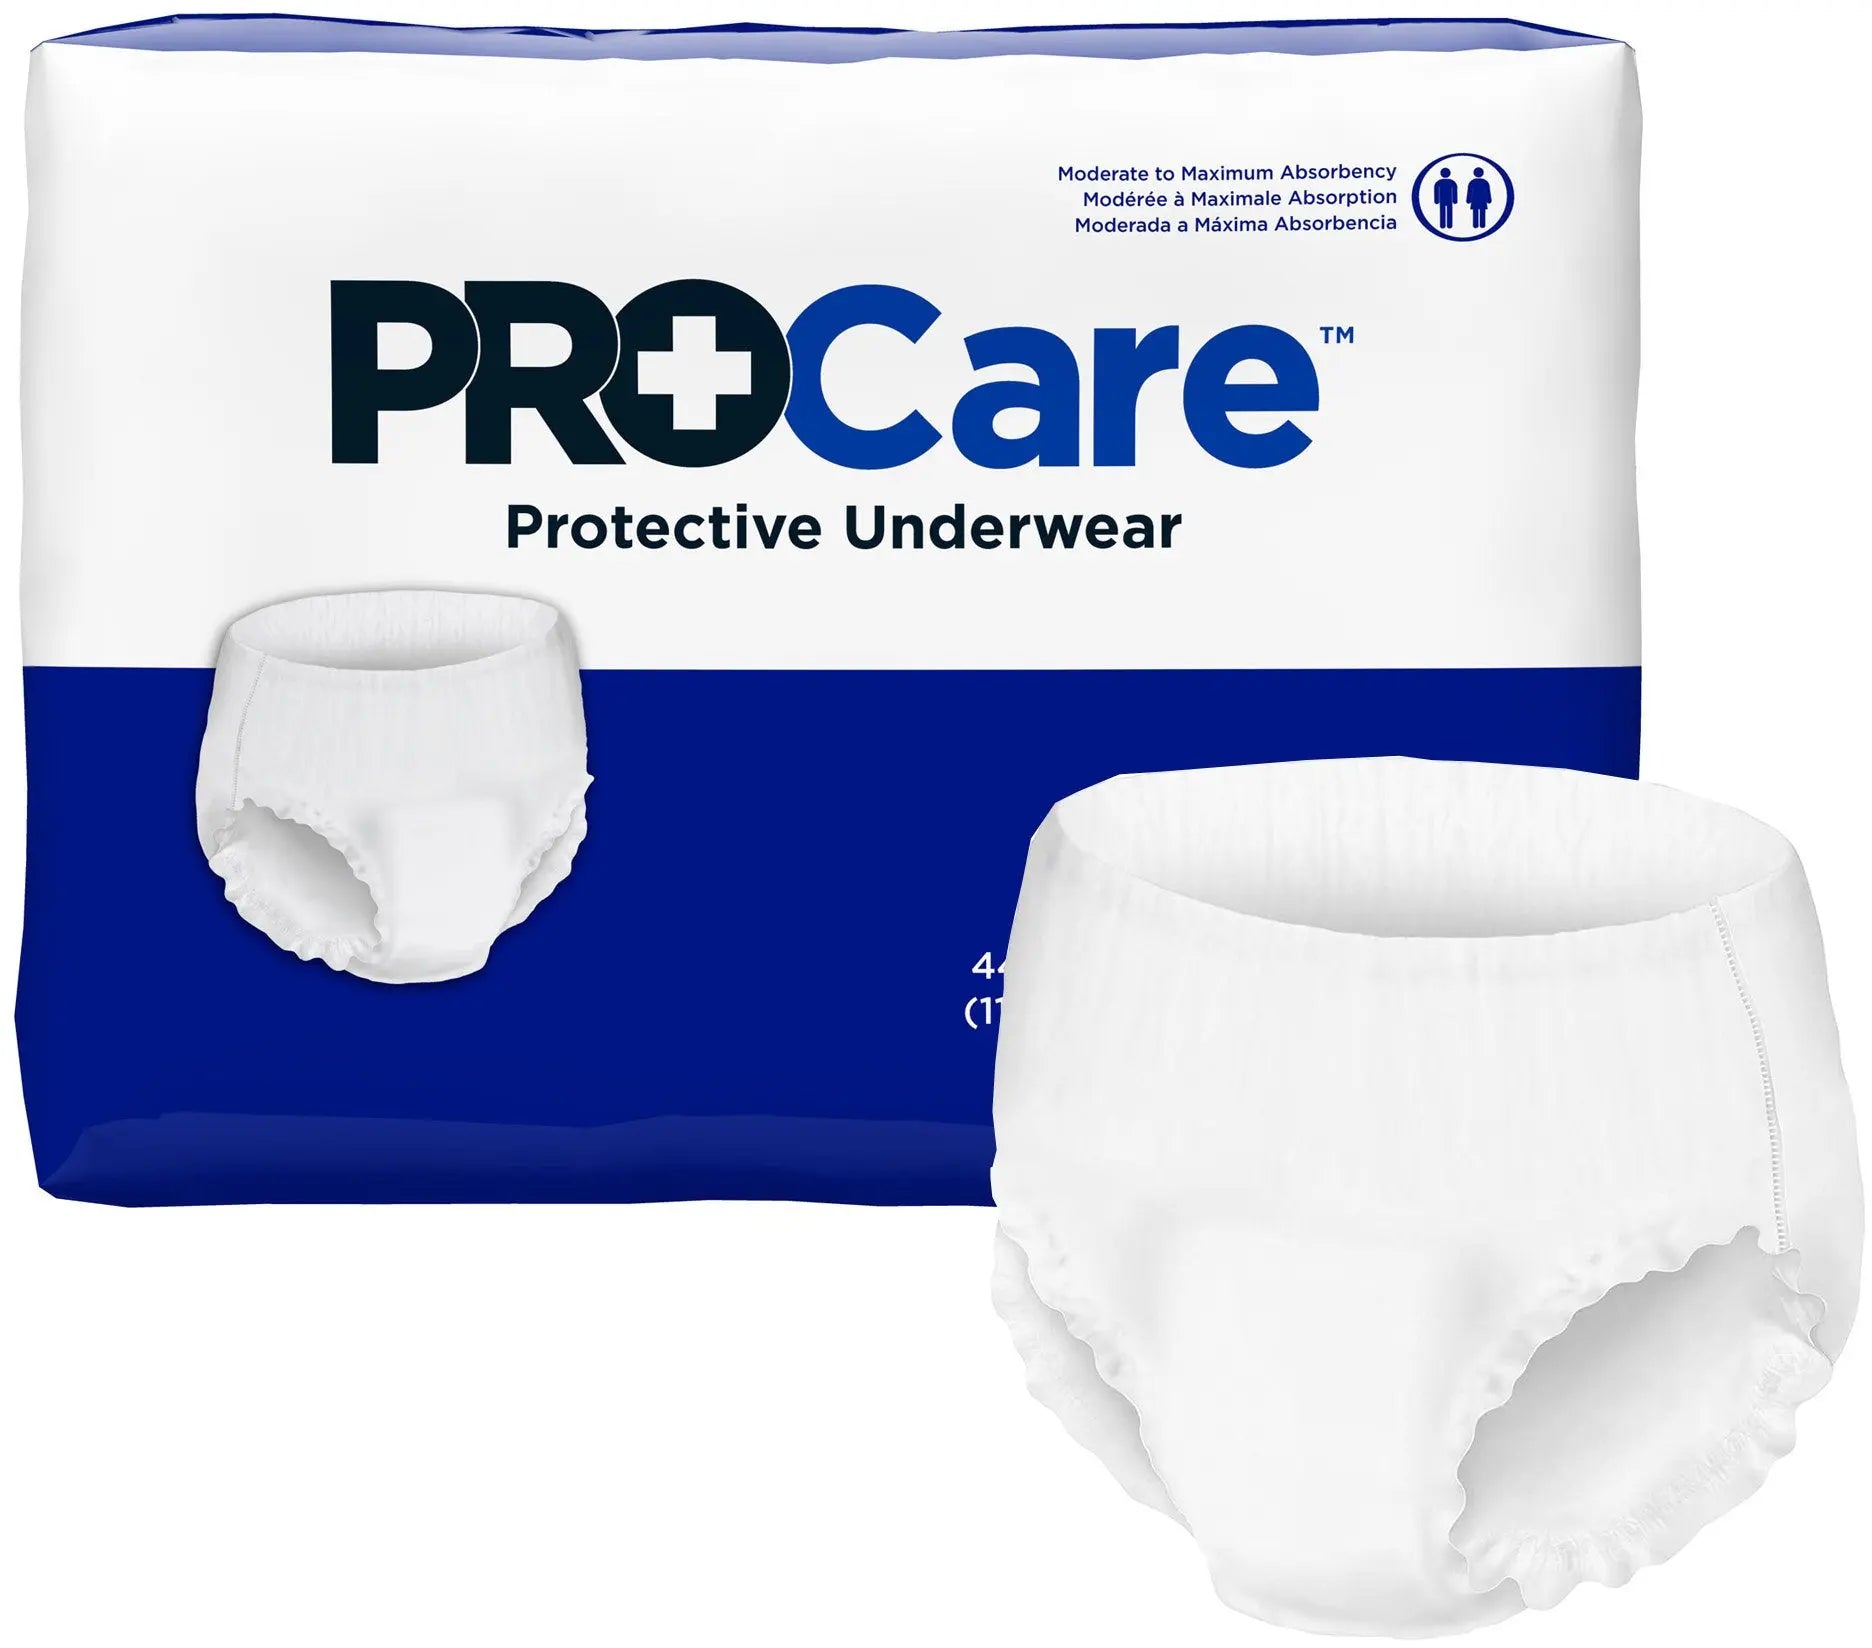 ProCare Protective Underwear for Moderate to Heavy Incontinence Protection